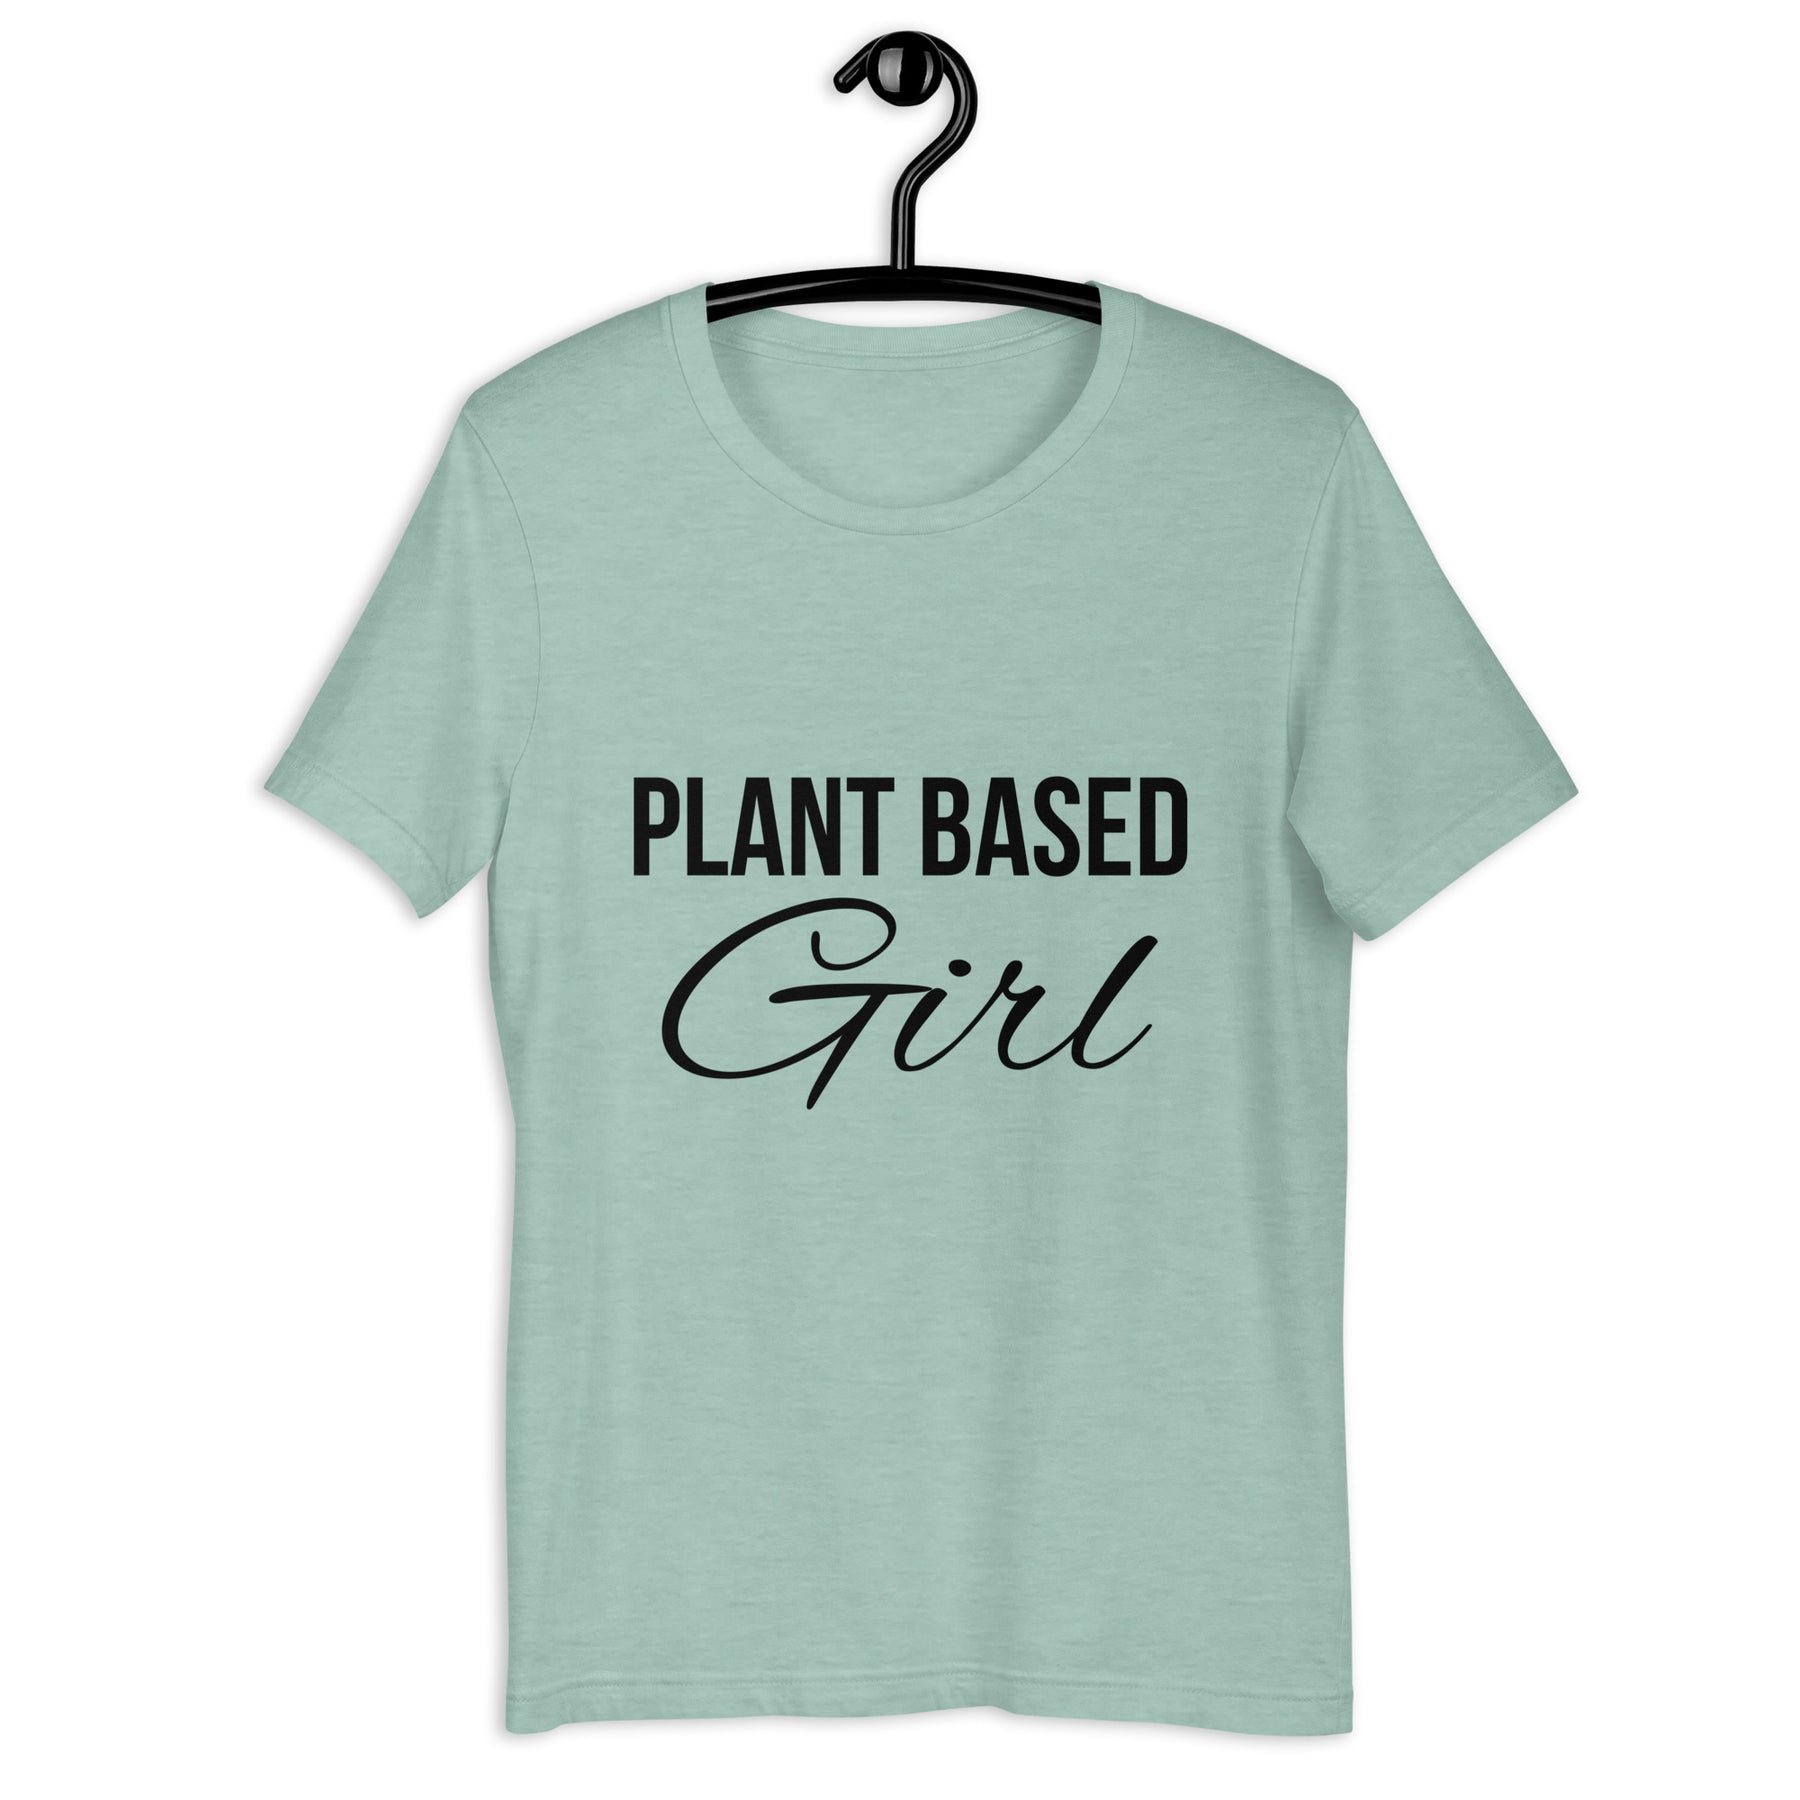 PLANT BASED GIRL Colored t-shirt